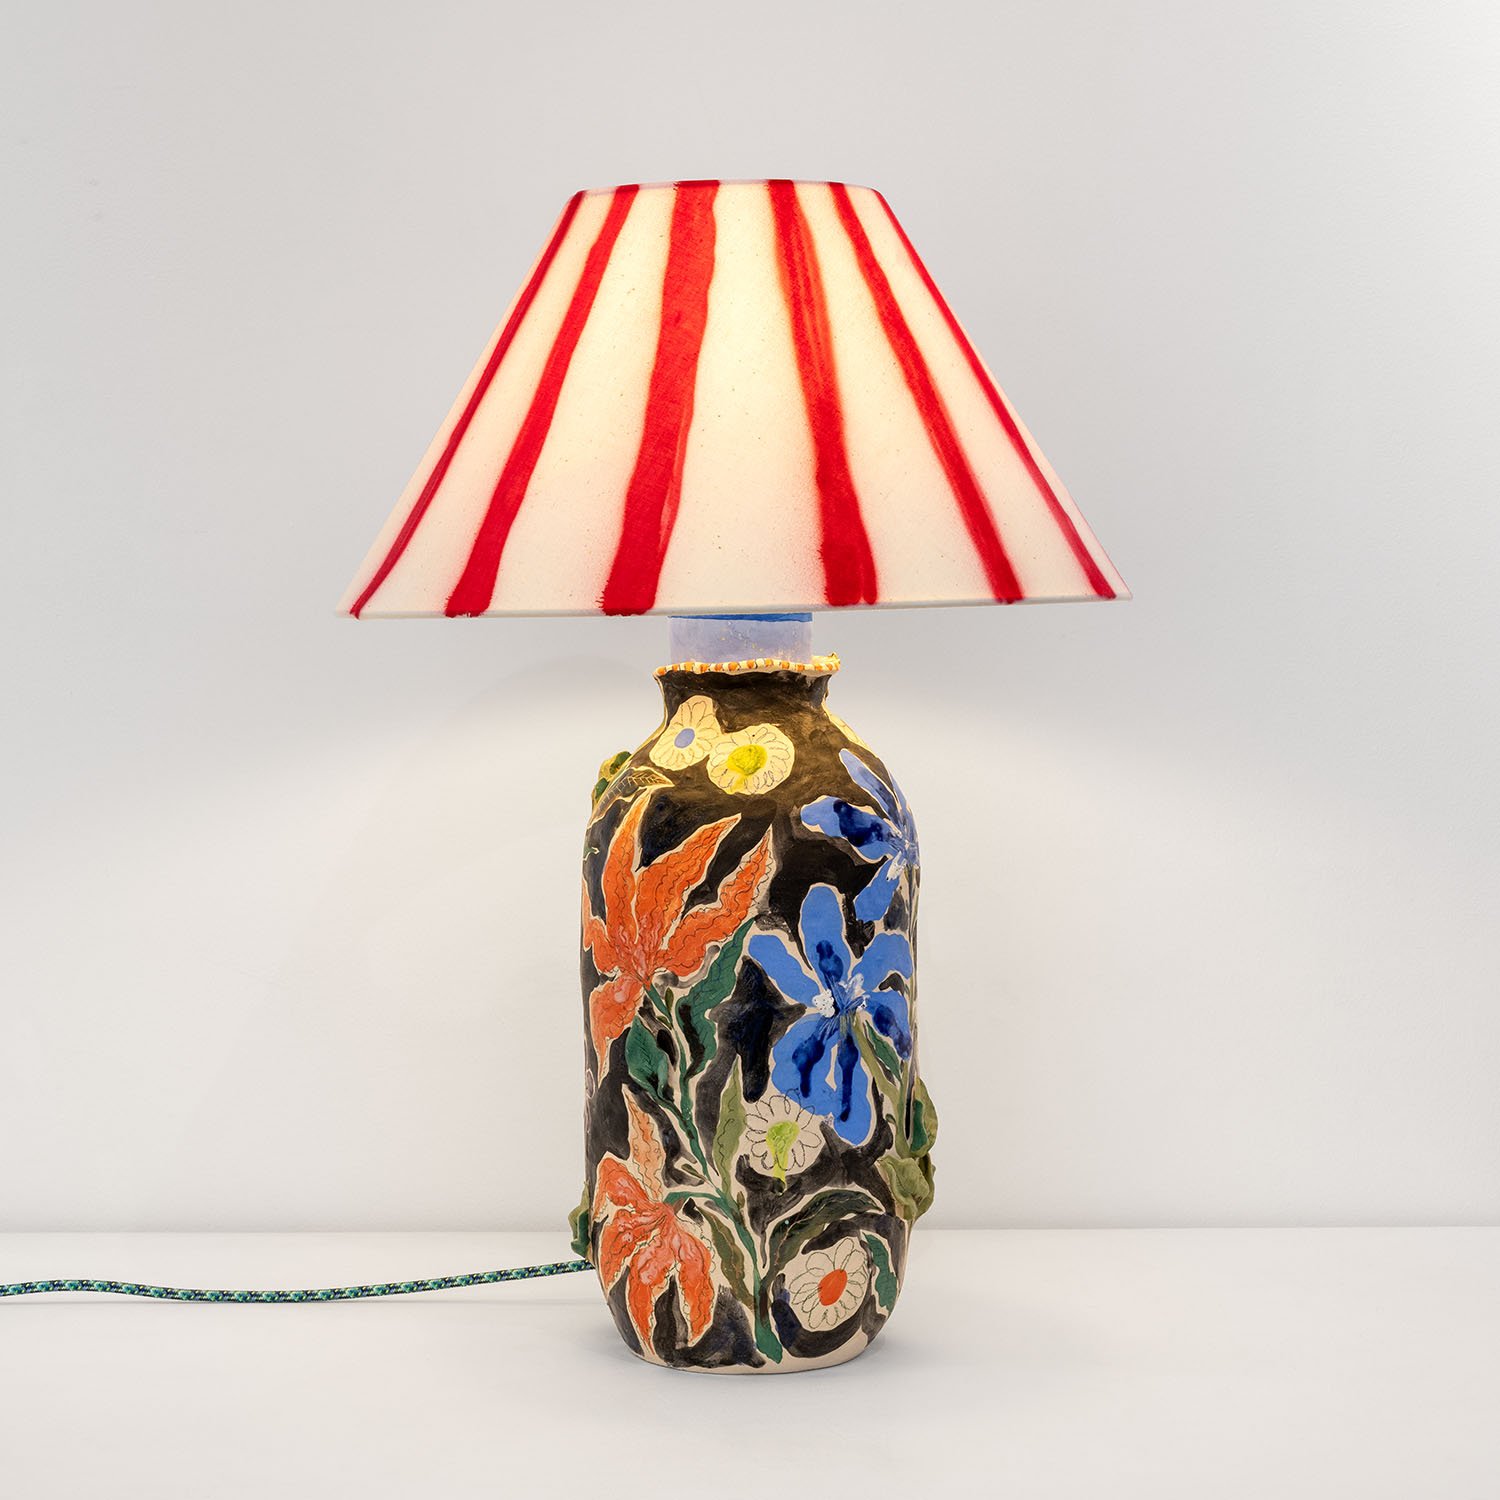   Camille Chastang   Lampe Femmage Botanique , 2024 Enamelled and engobed ceramic 58 x 43 Ø cm ·&nbsp;23 x 17 Ø in 